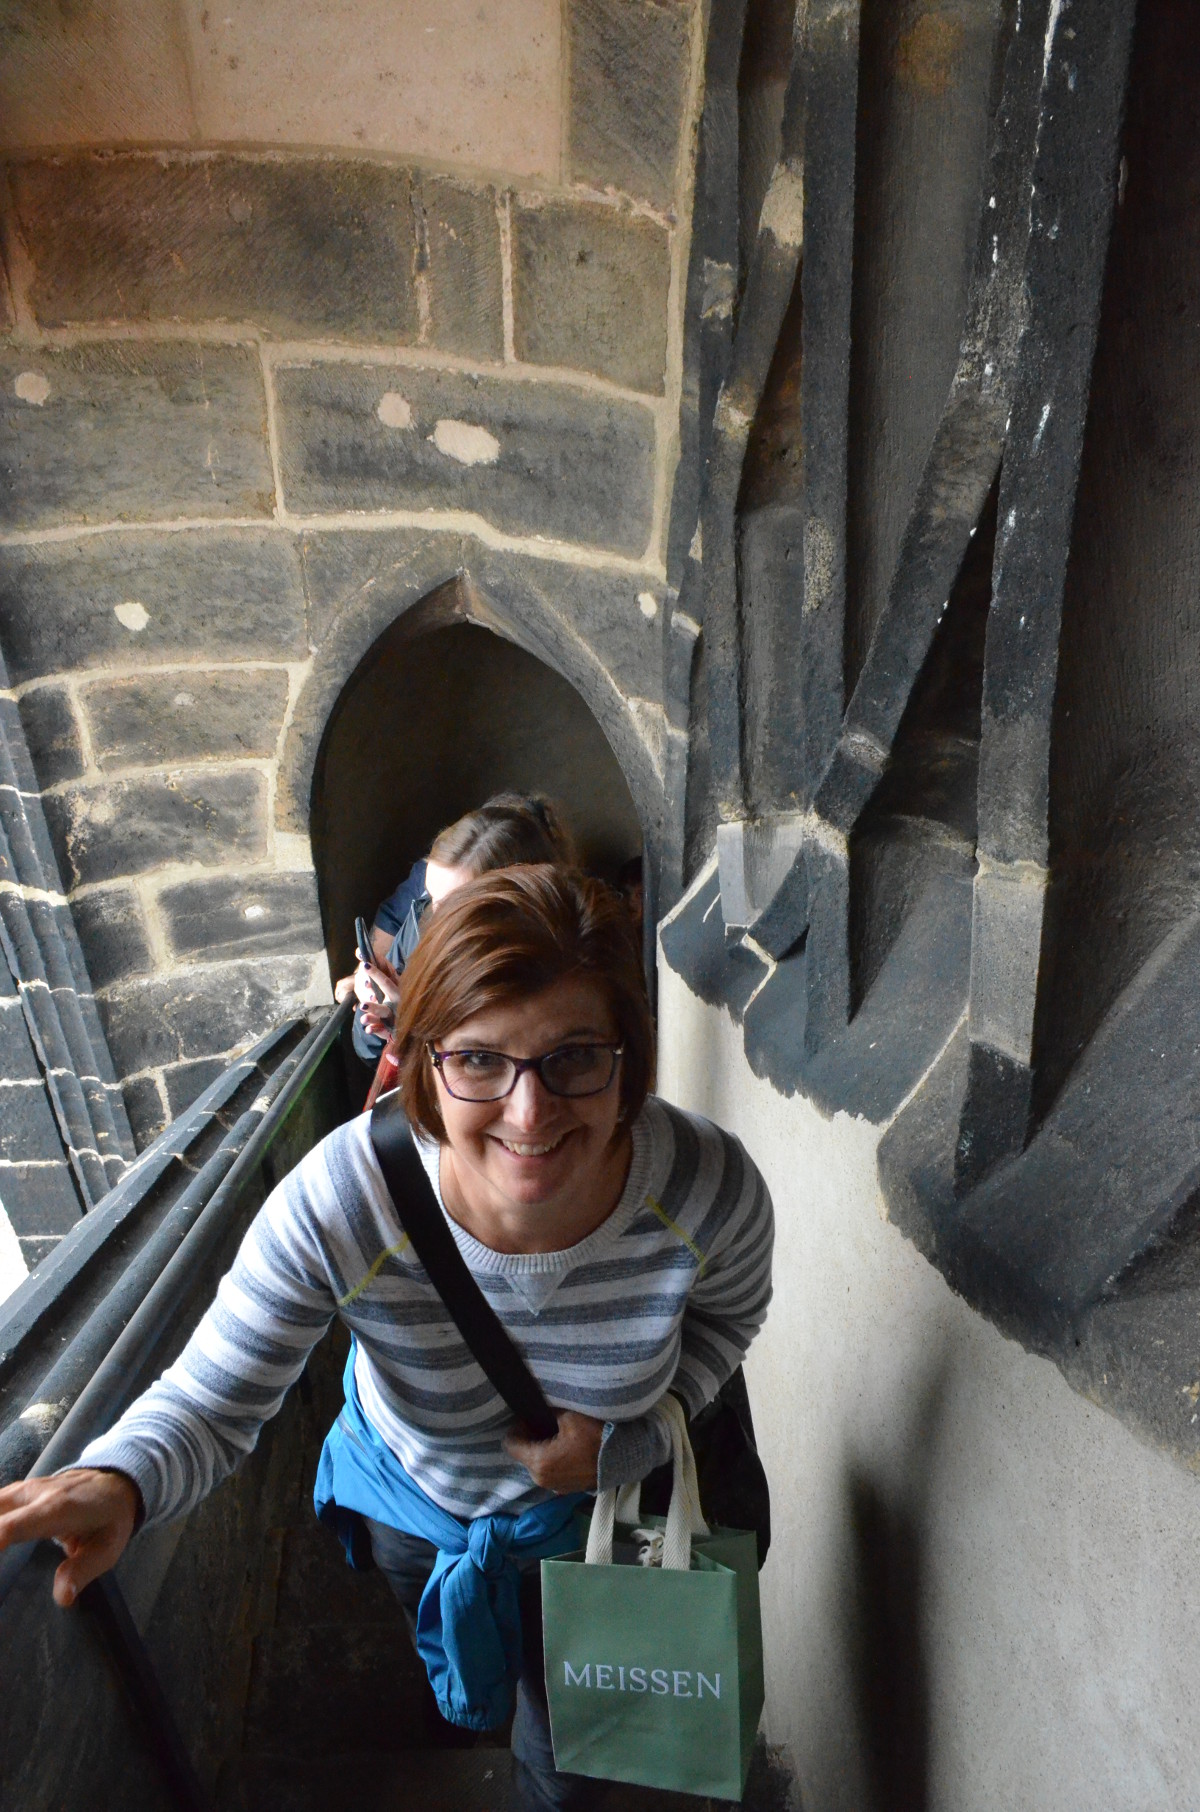 Going up the stairs of the cathedral